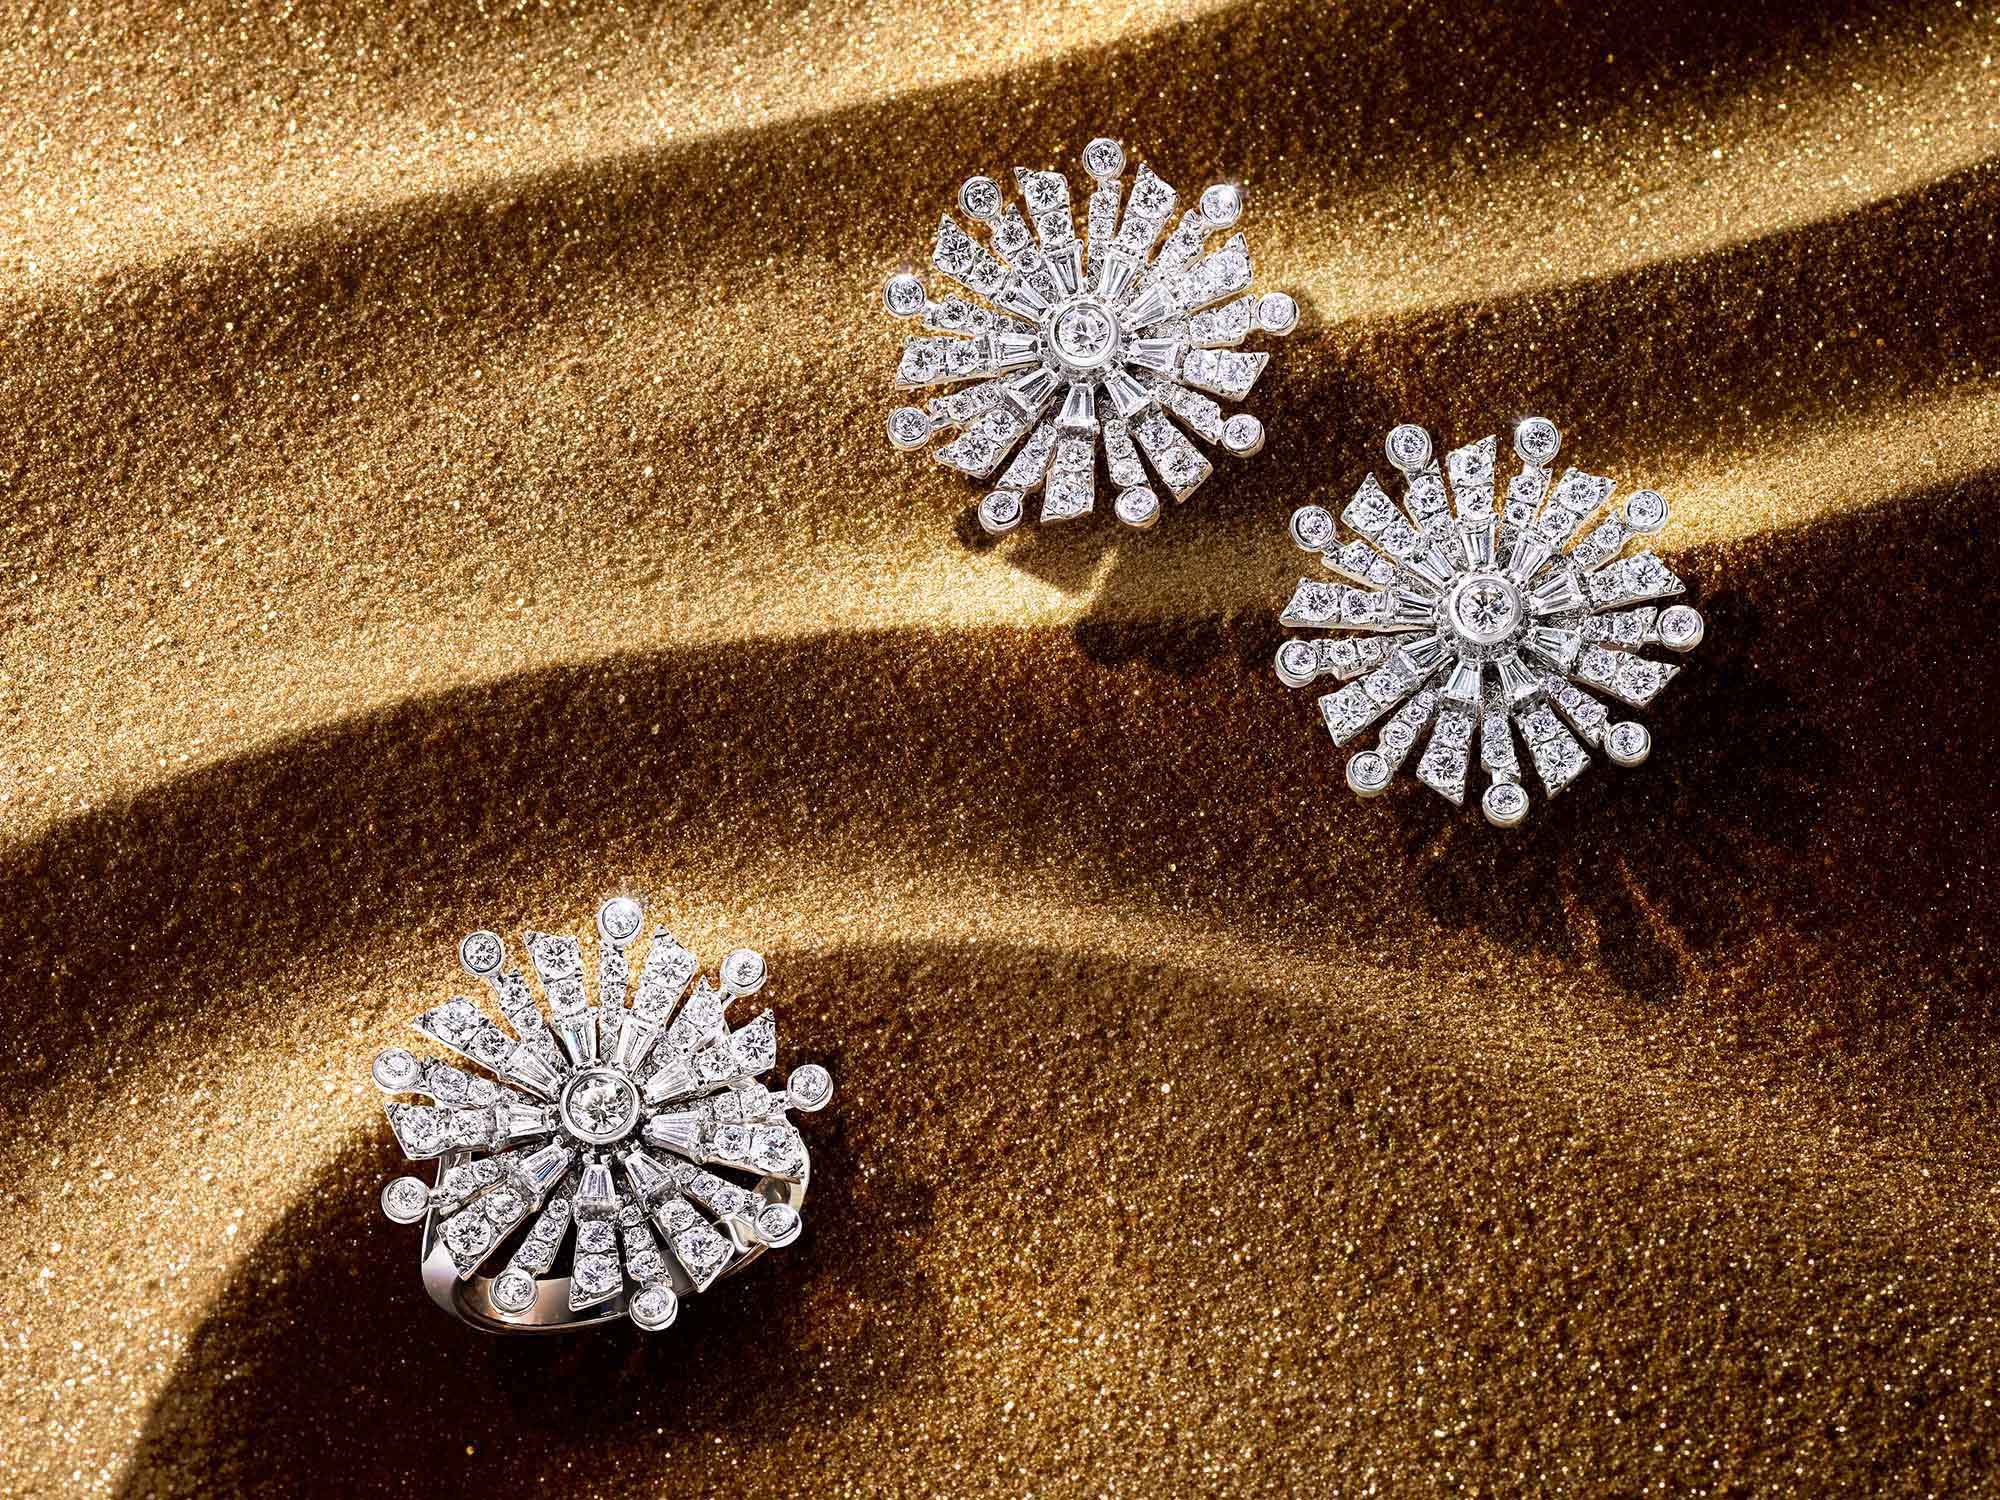 The Graff New Dawn diamond earrings and ring from the Tribal jewellery collection, on sand